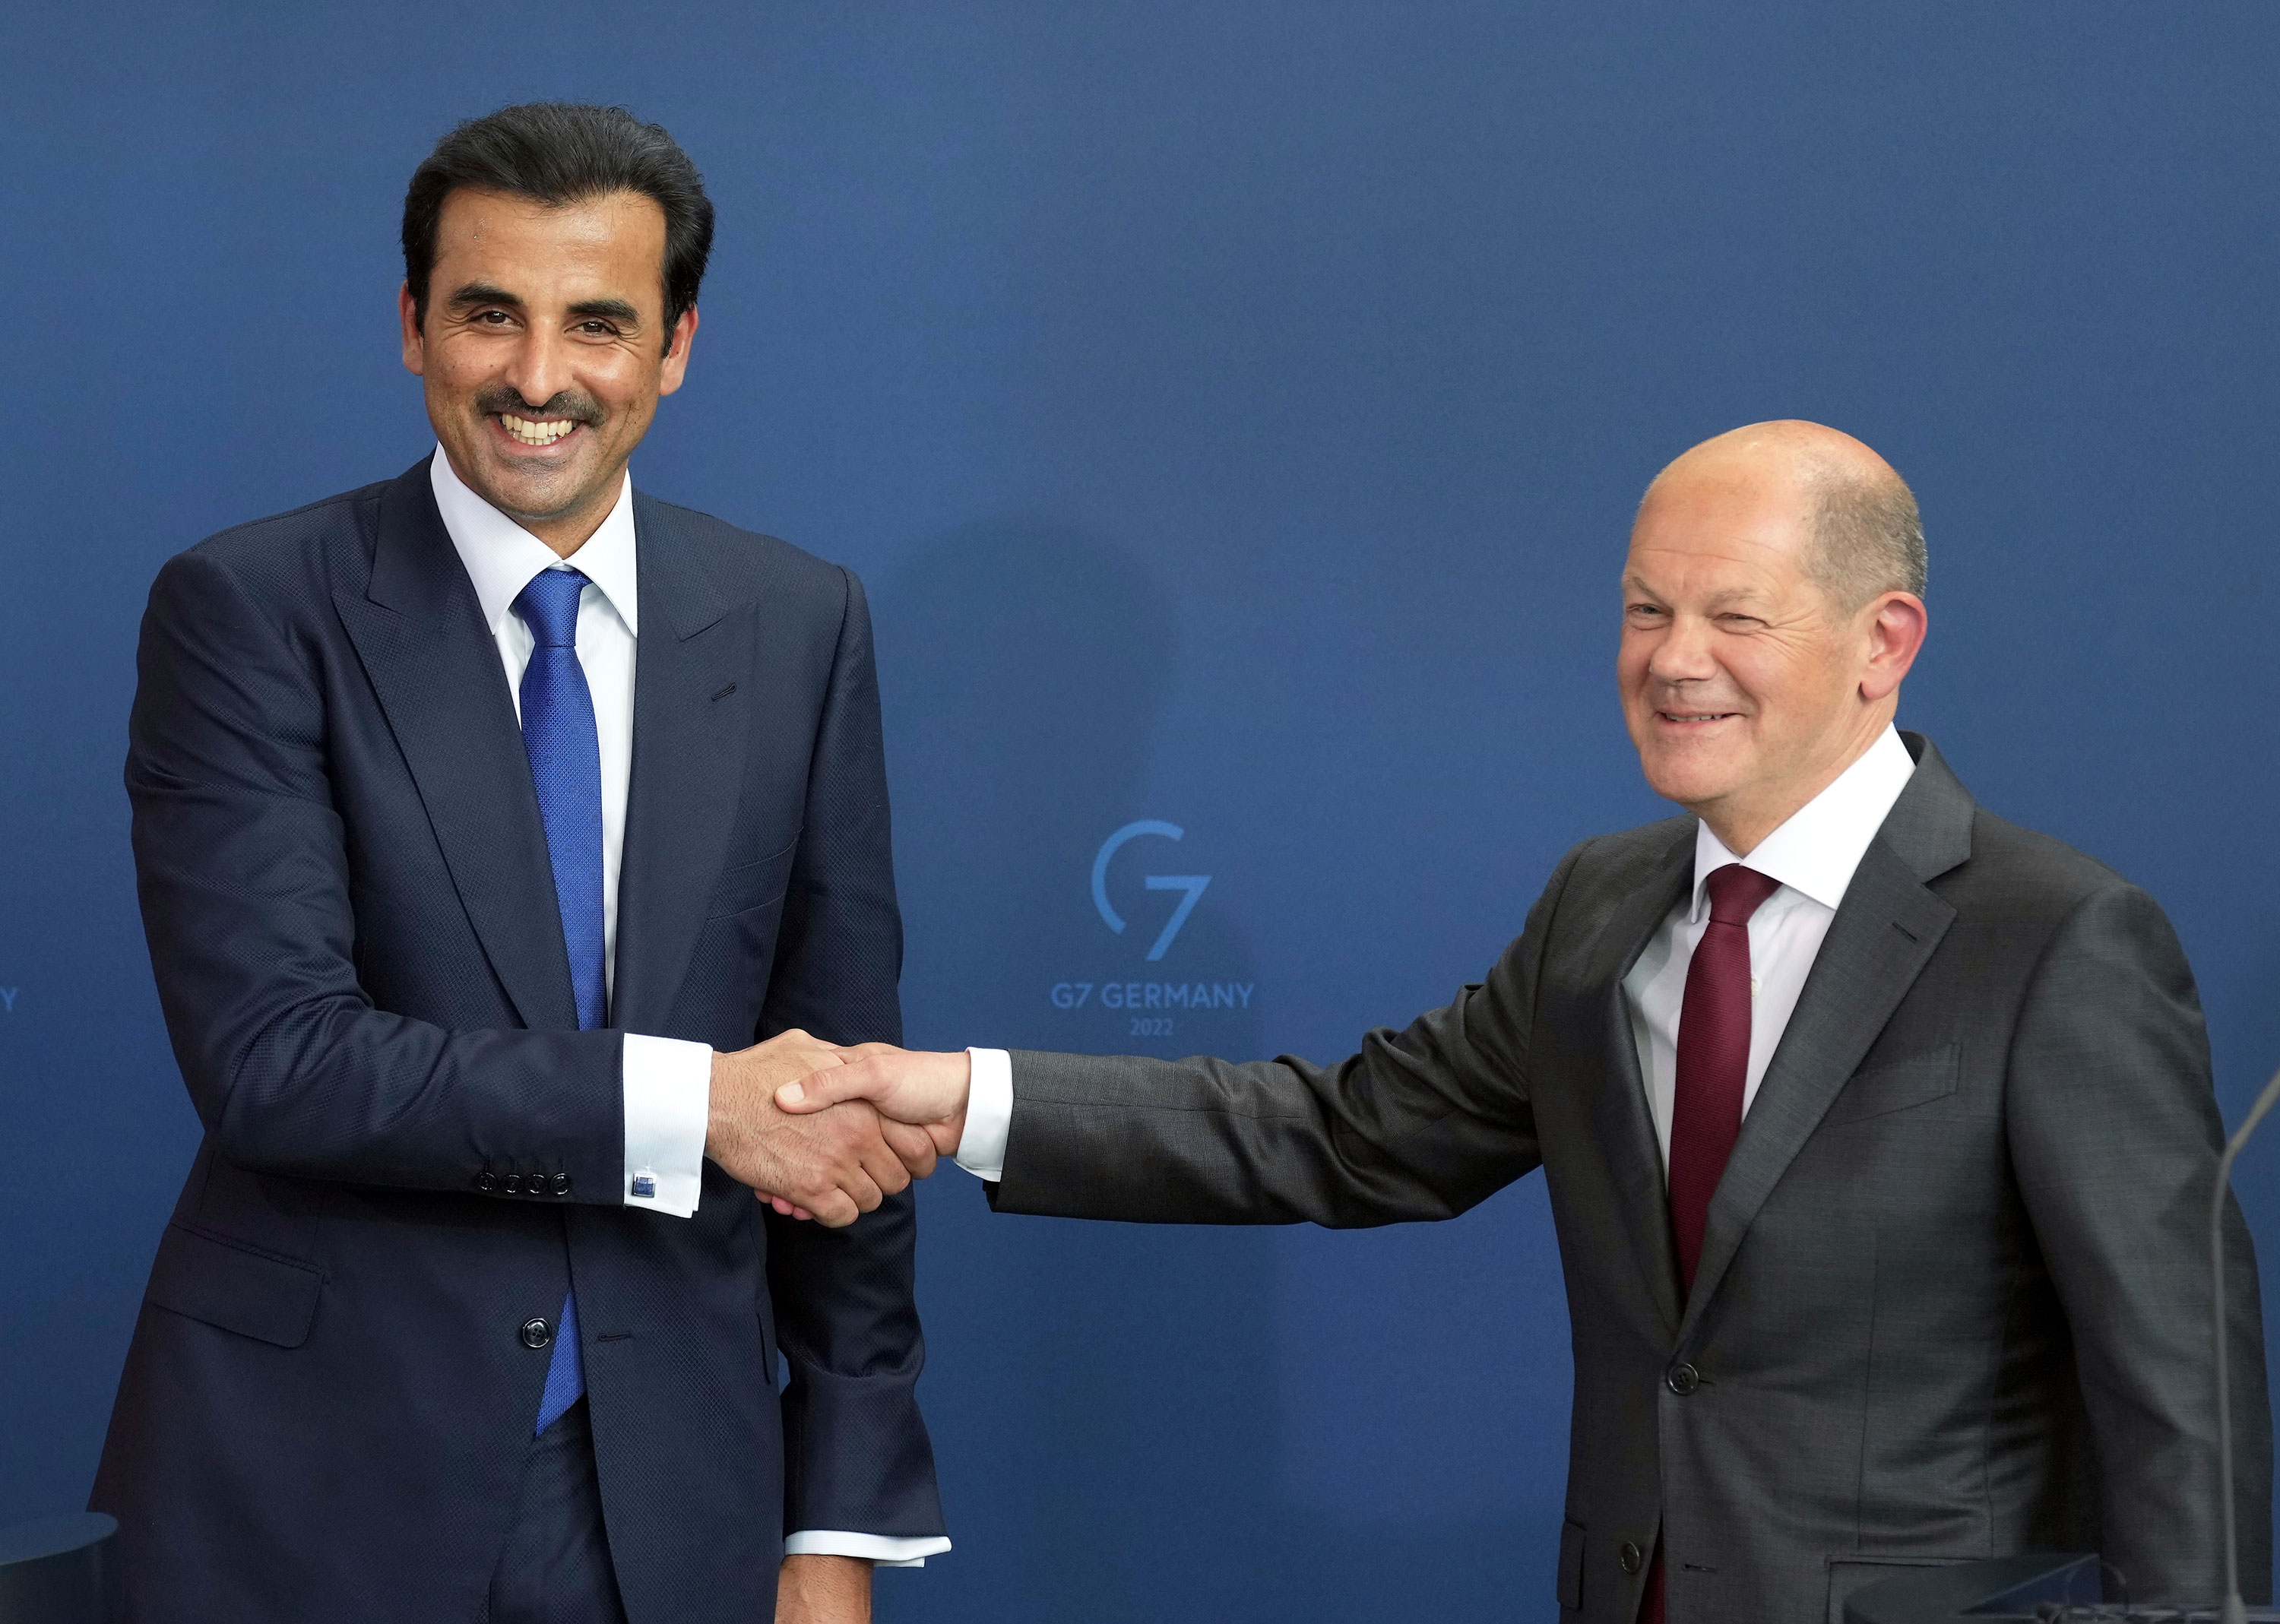 The Emir of Qatar Sheikh Tamim bin Hamad Al Thani and German Chancellor Olaf Scholz shake hands after a joint press conference in Berlin on Friday.